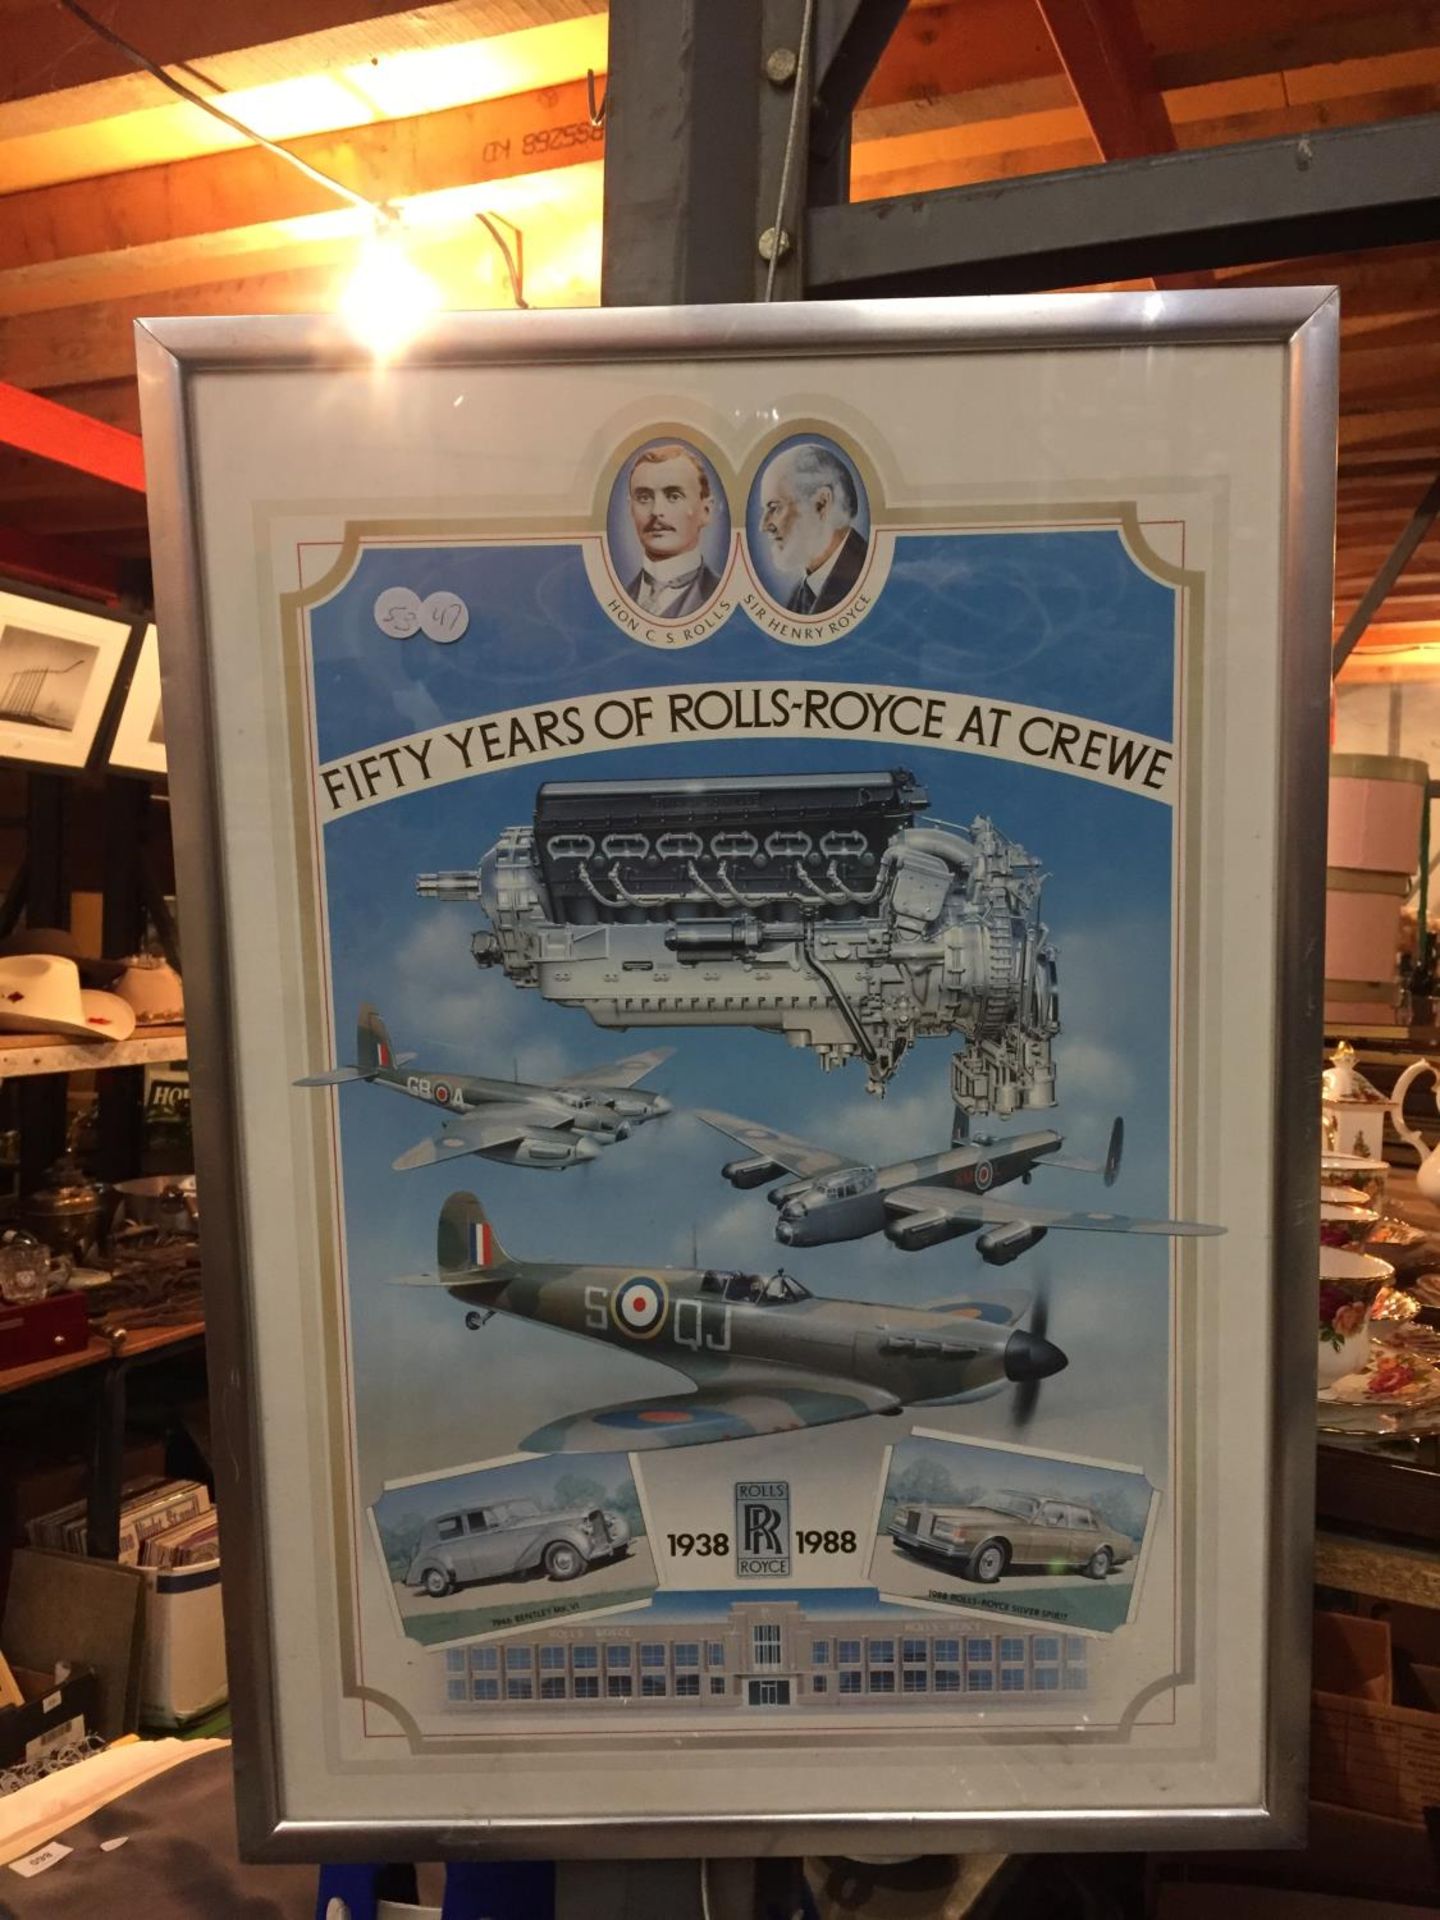 A FRAMED 'FIFTY YEARS OF ROLLS-ROYCE AT CREWE' RAF PICTURE